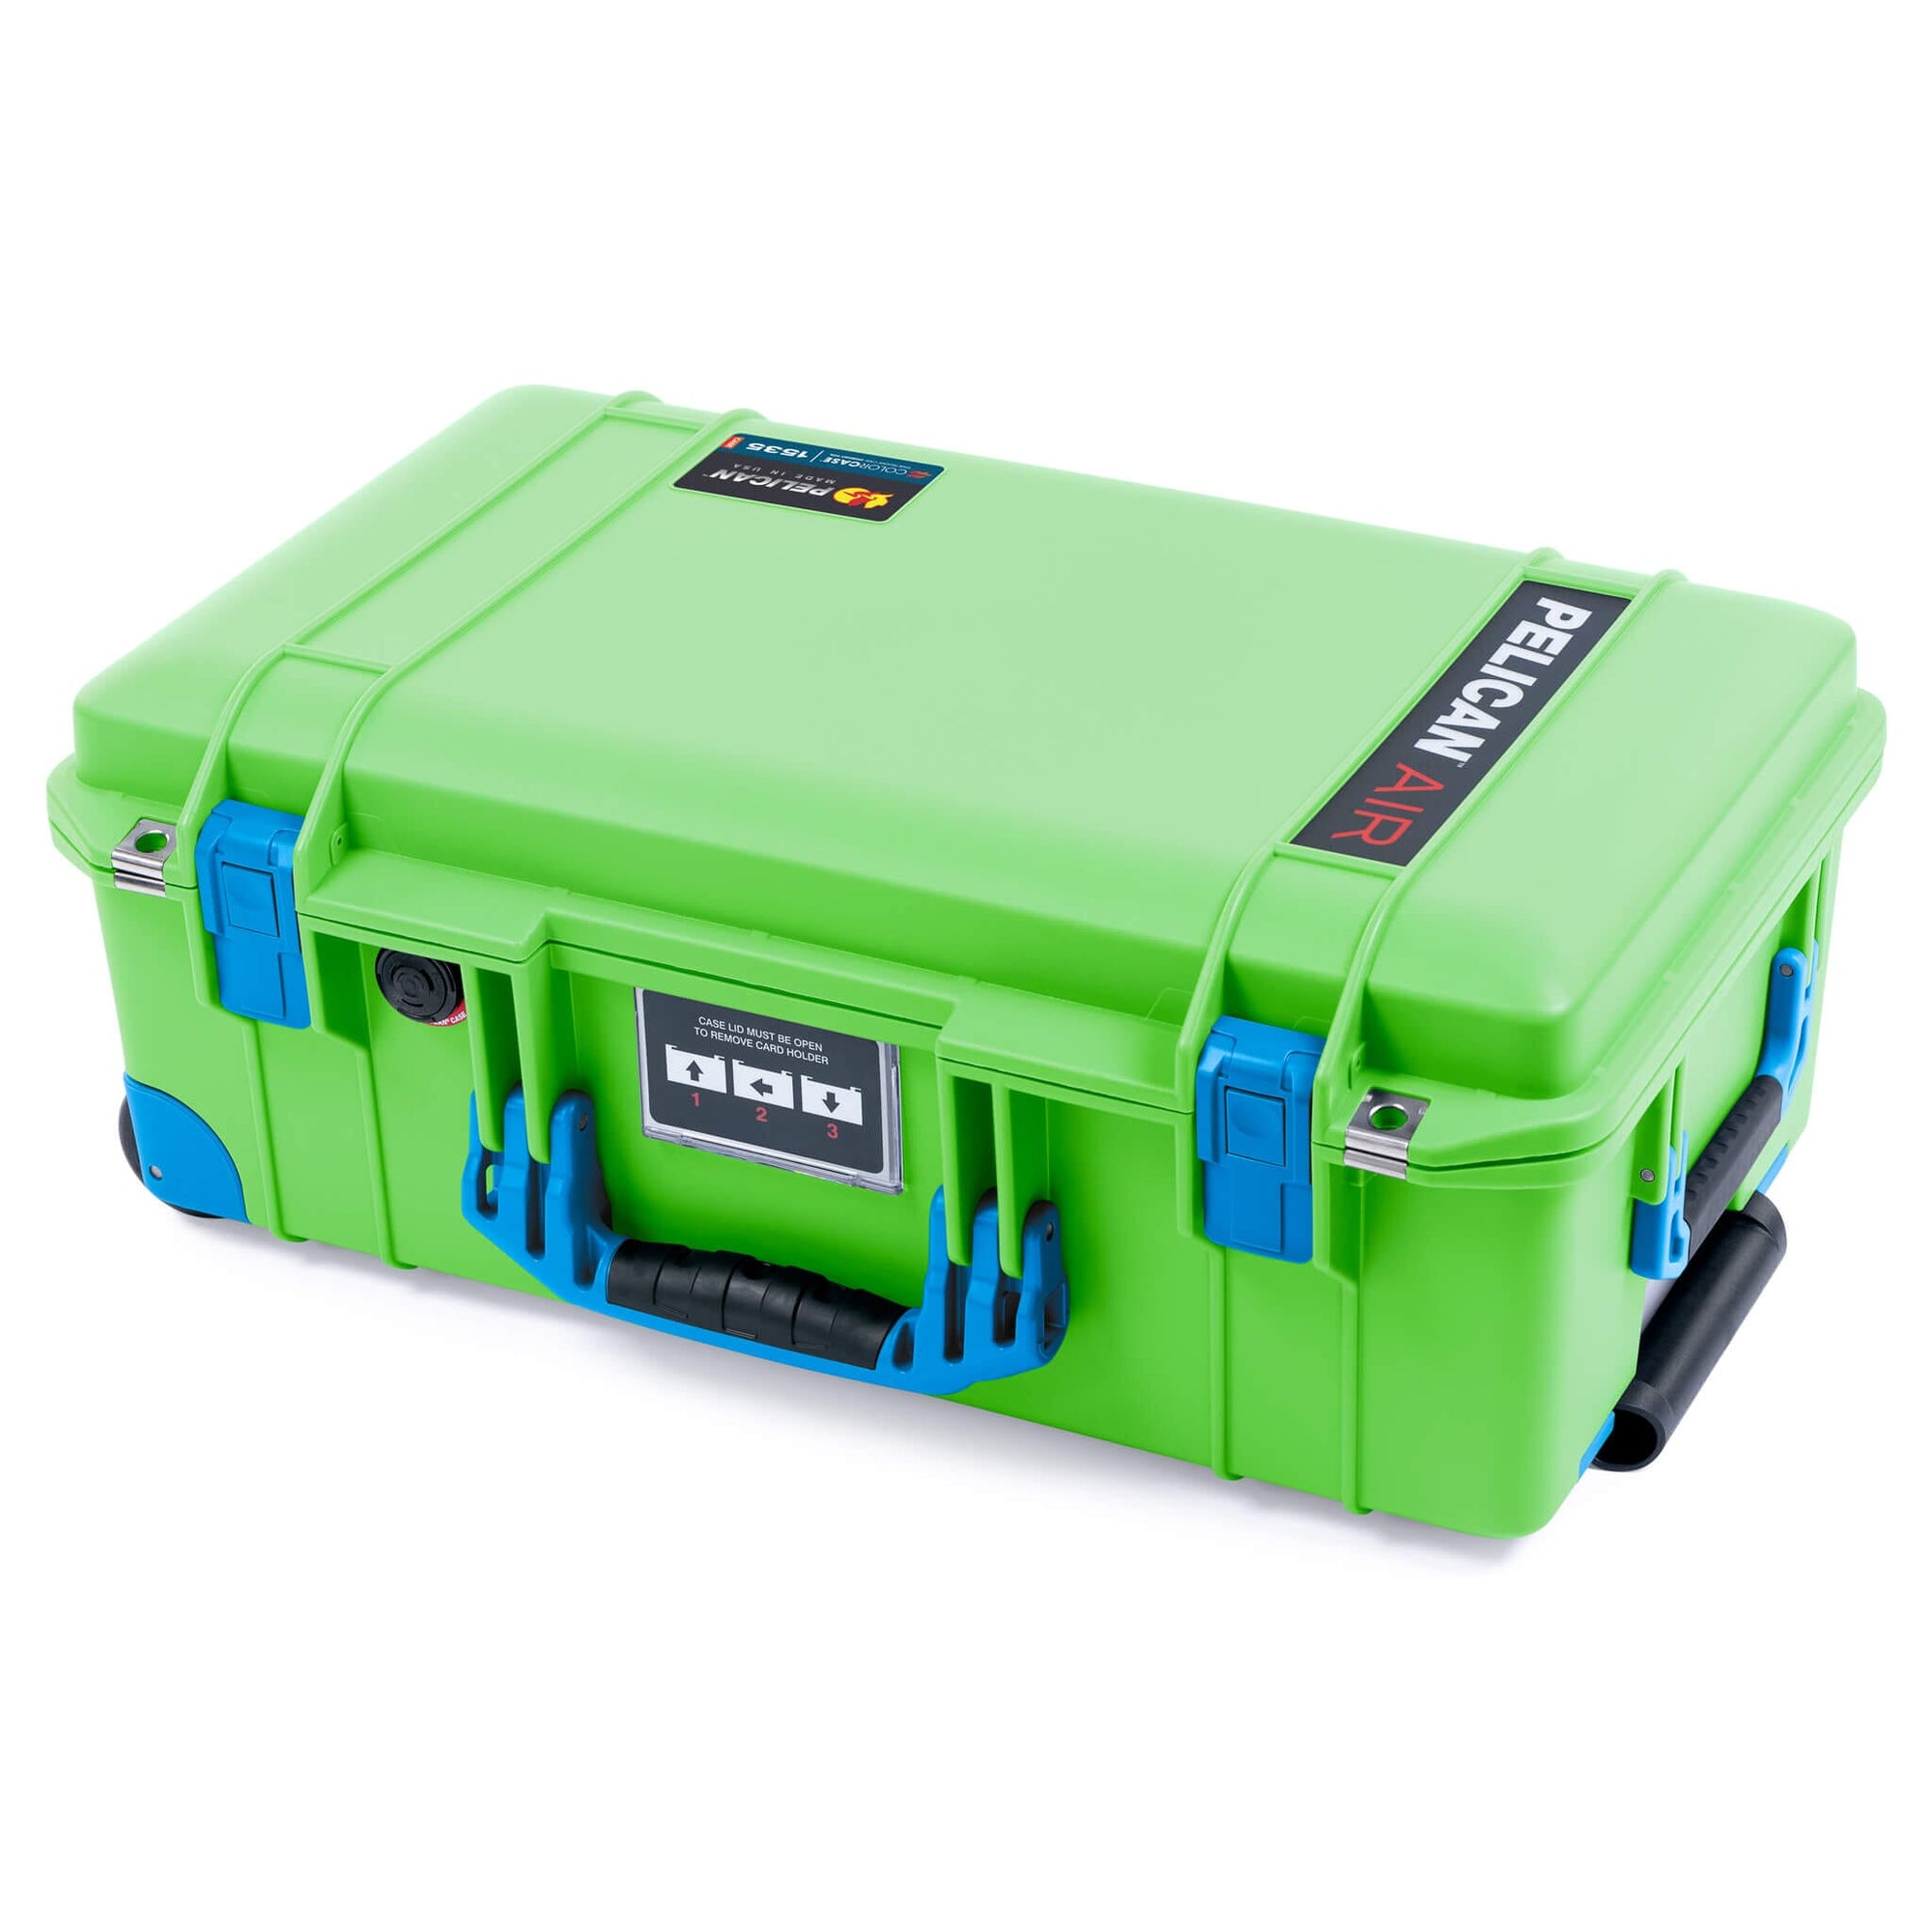 Pelican 1535 Air Case, Lime Green with Blue Handles, Push-Button Latches & Trolley ColorCase 